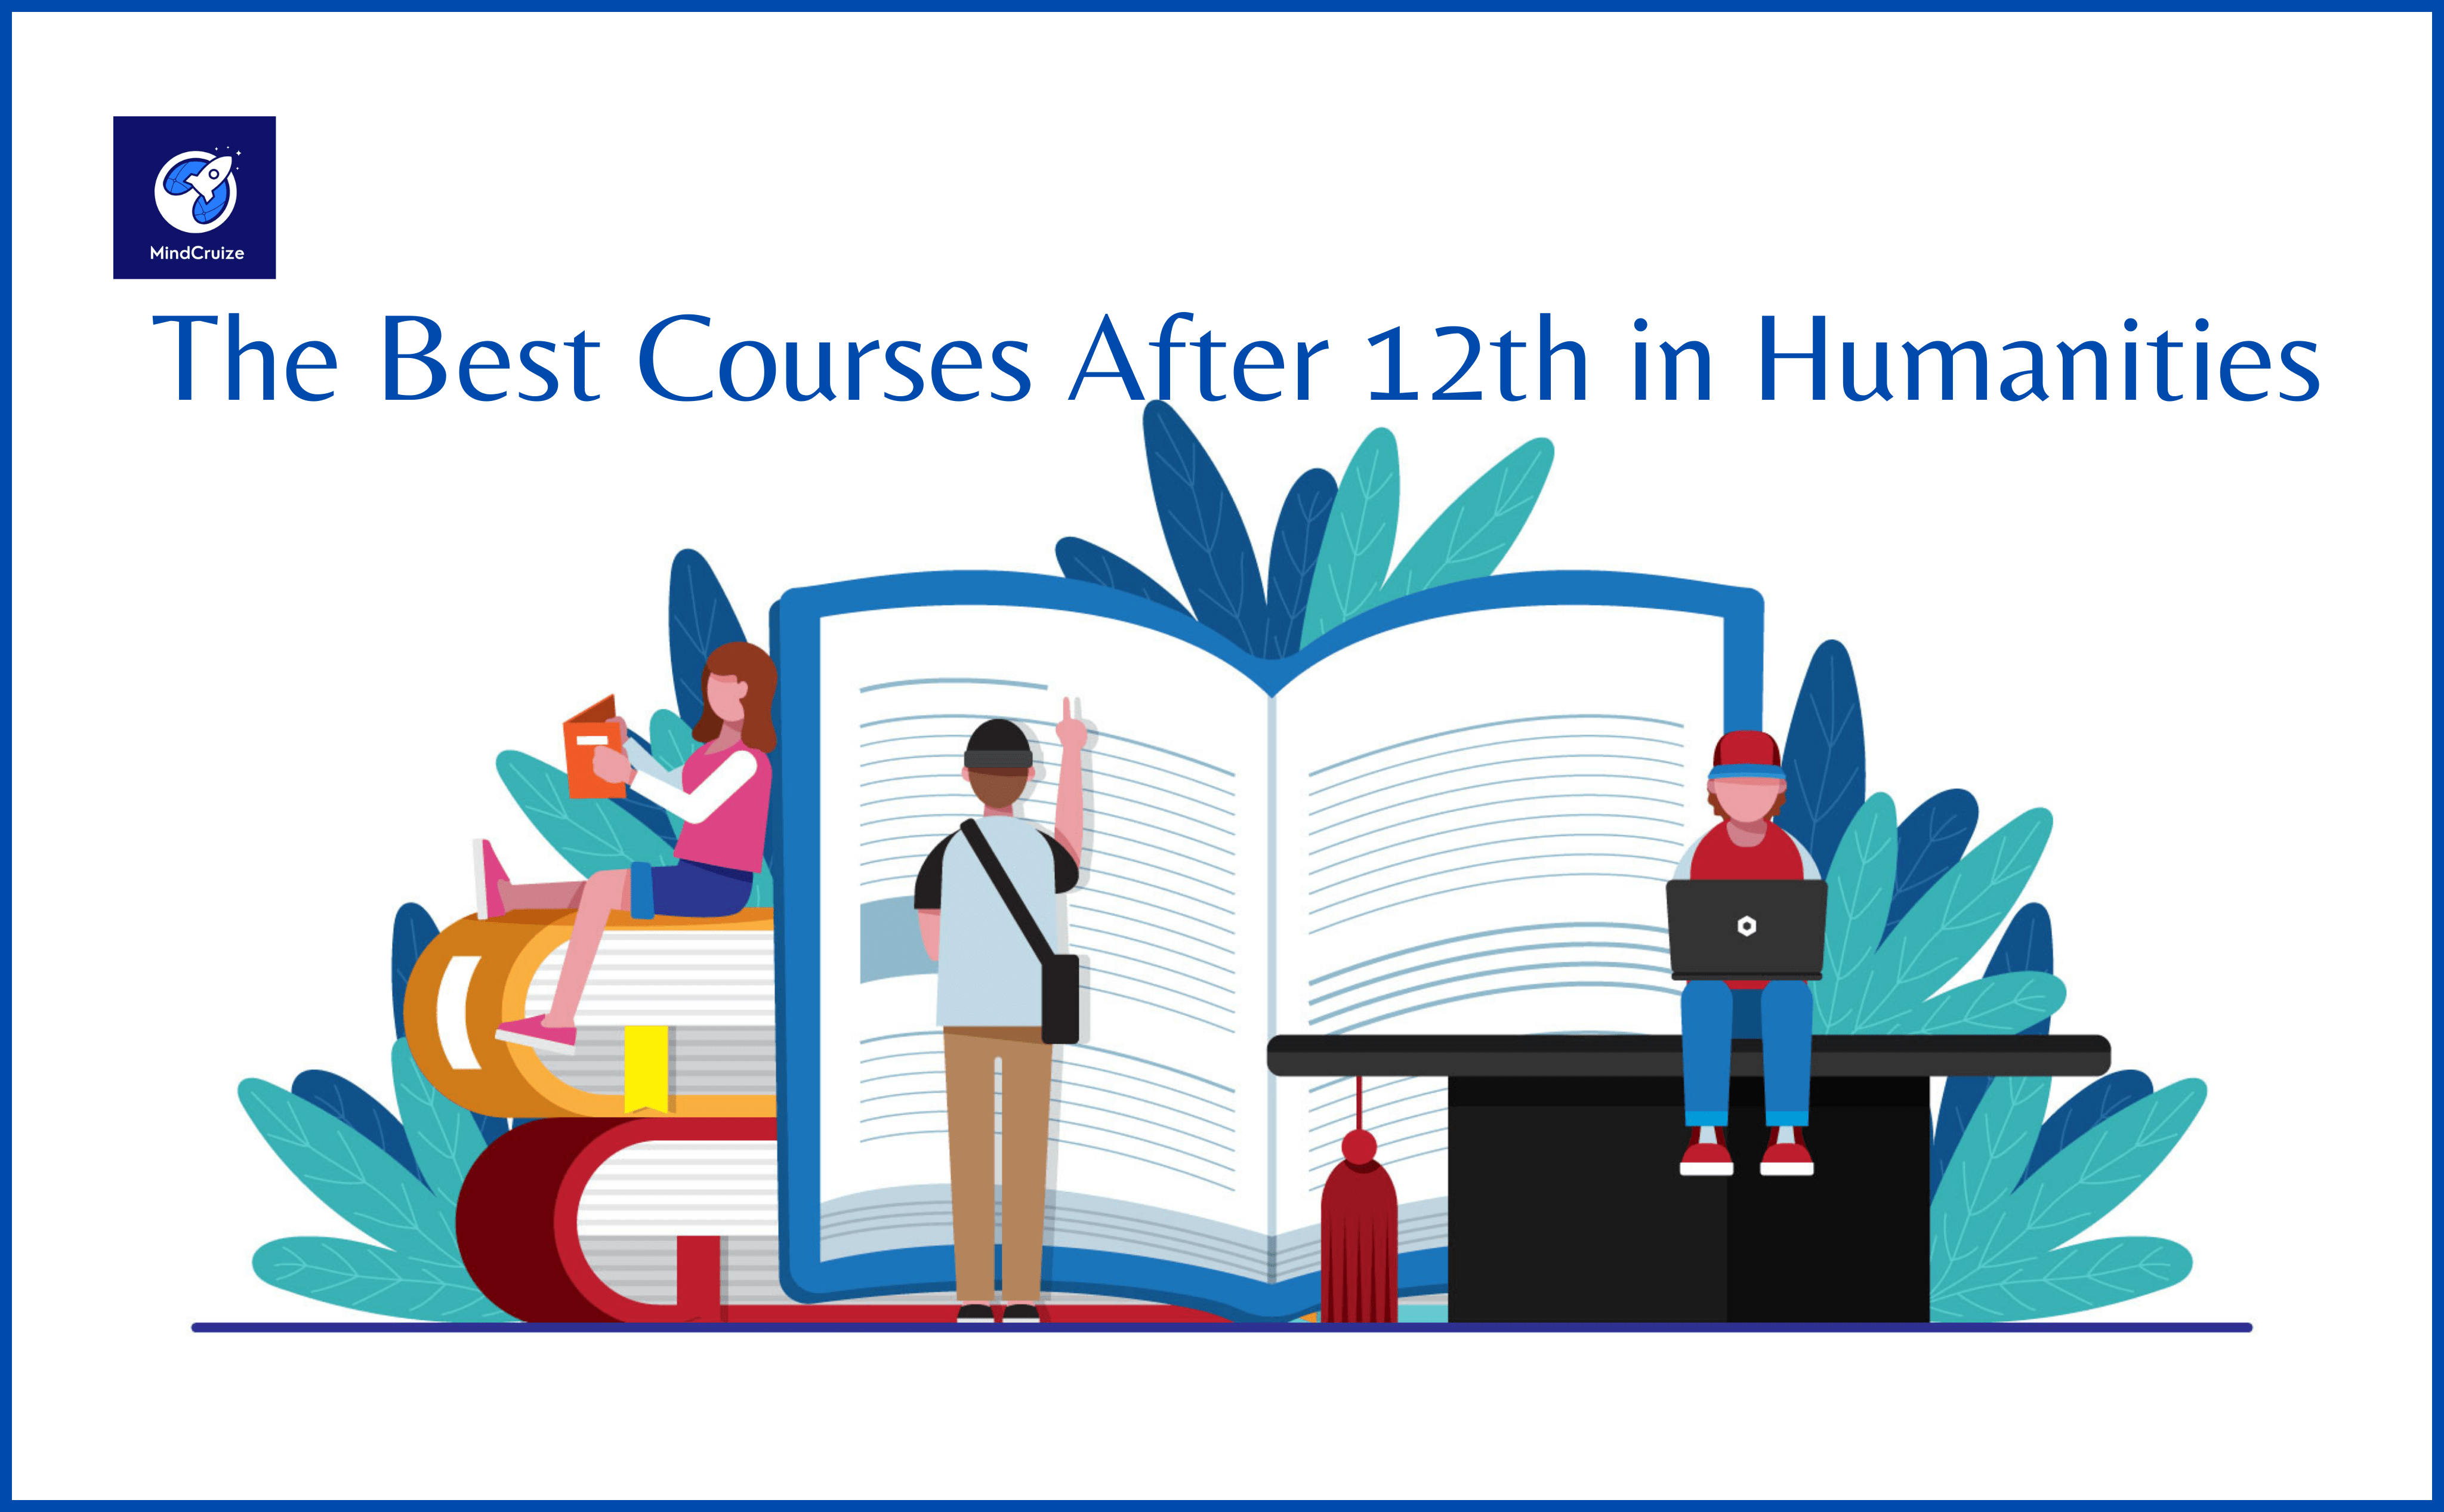 The Best Courses After 12th in Humanities